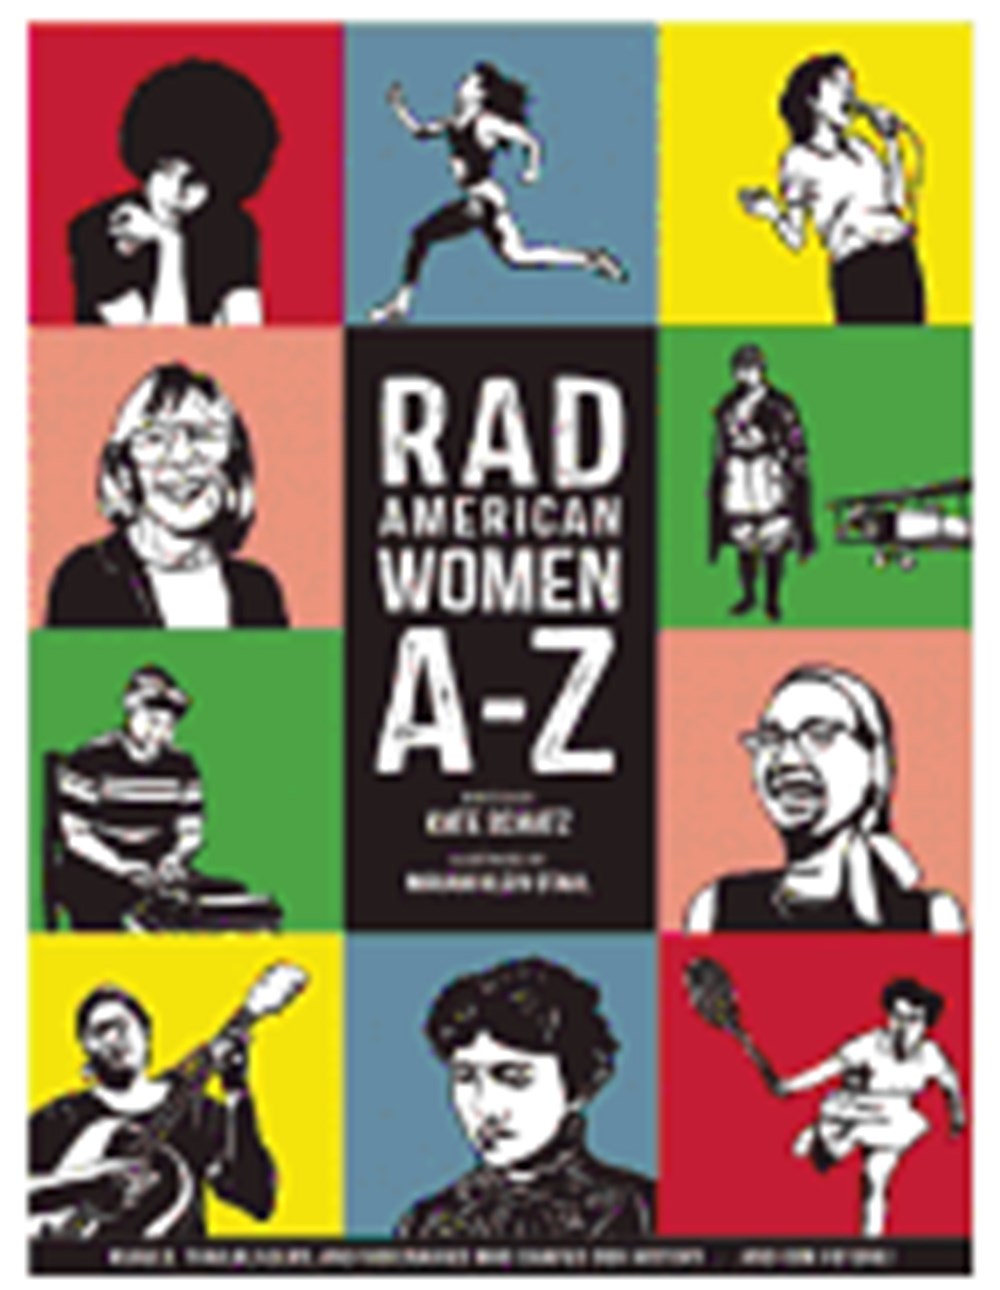 Rad American Women A-Z: Rebels, Trailblazers, and Visionaries Who Shaped Our History . . . and Our F